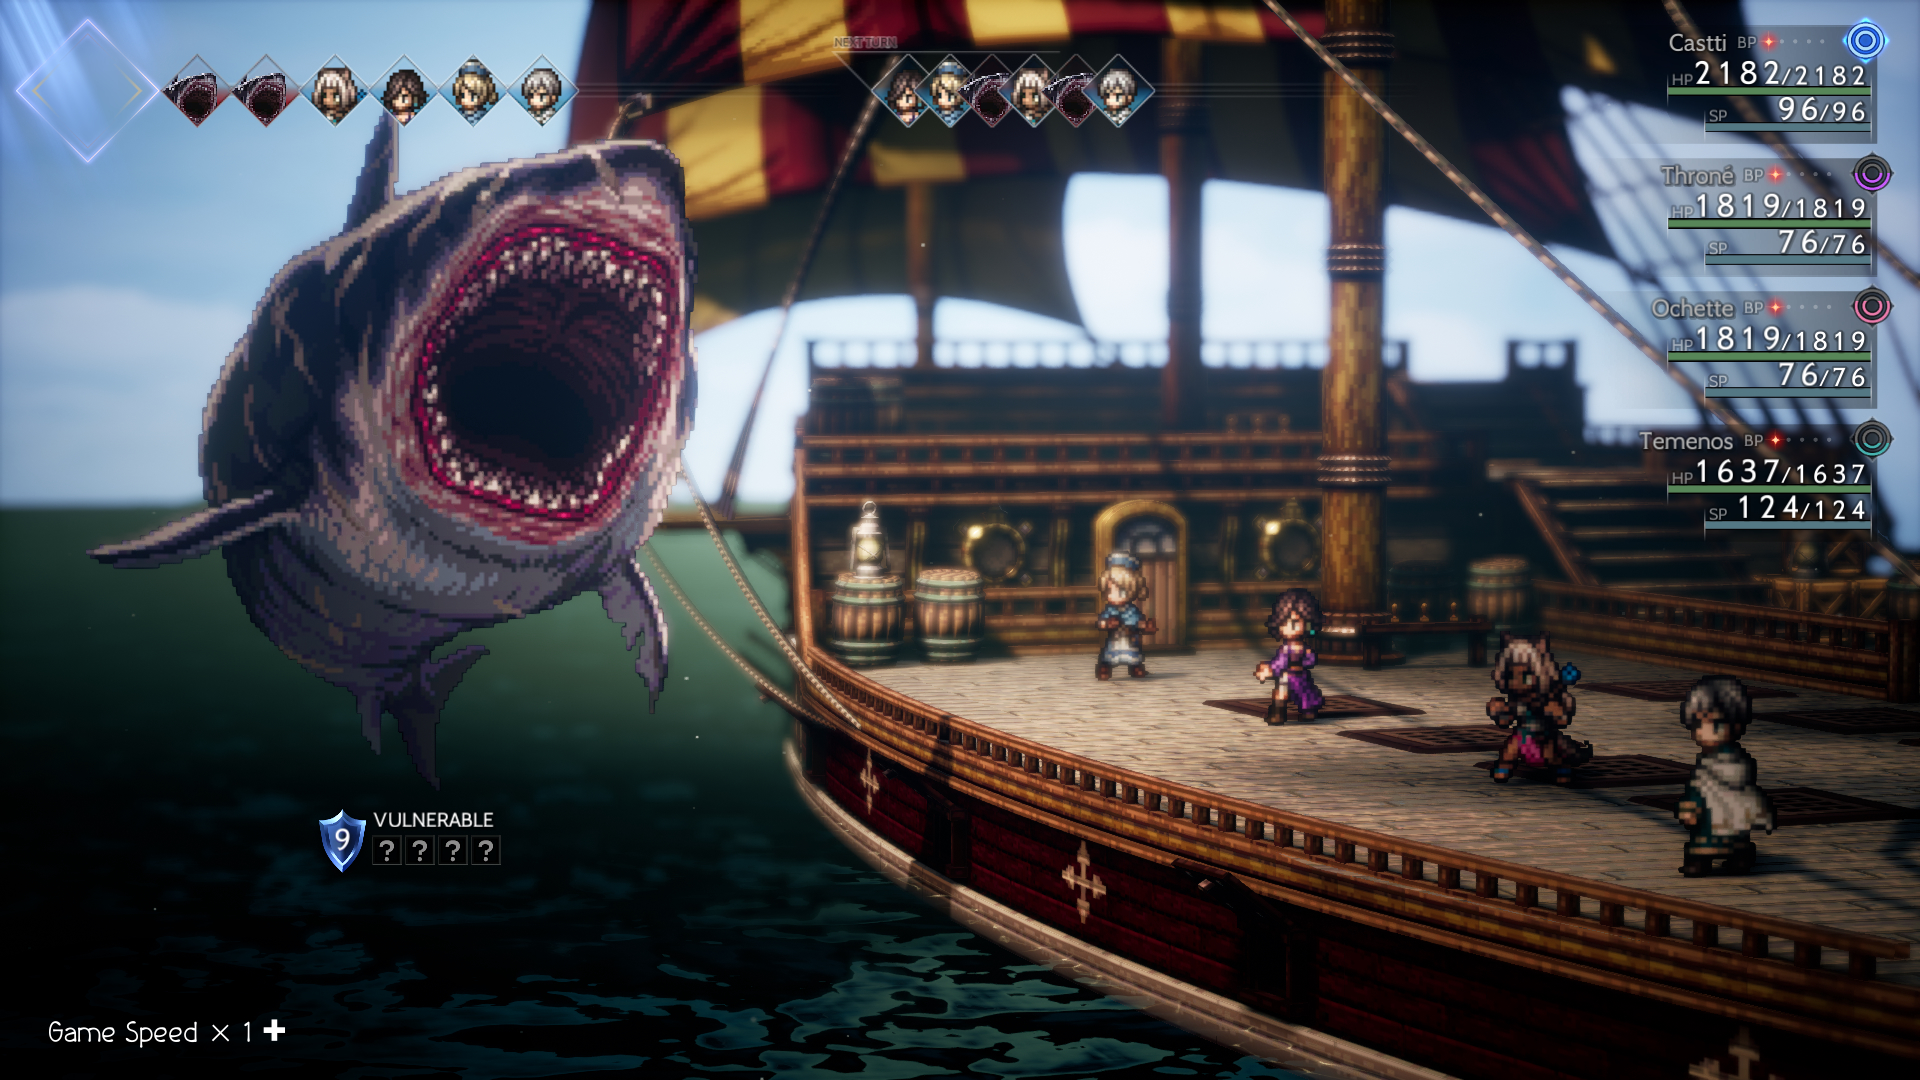 A giant shark menaces a line of four pixelated characters standing on the deck of a ship in Octopath Traveler 2